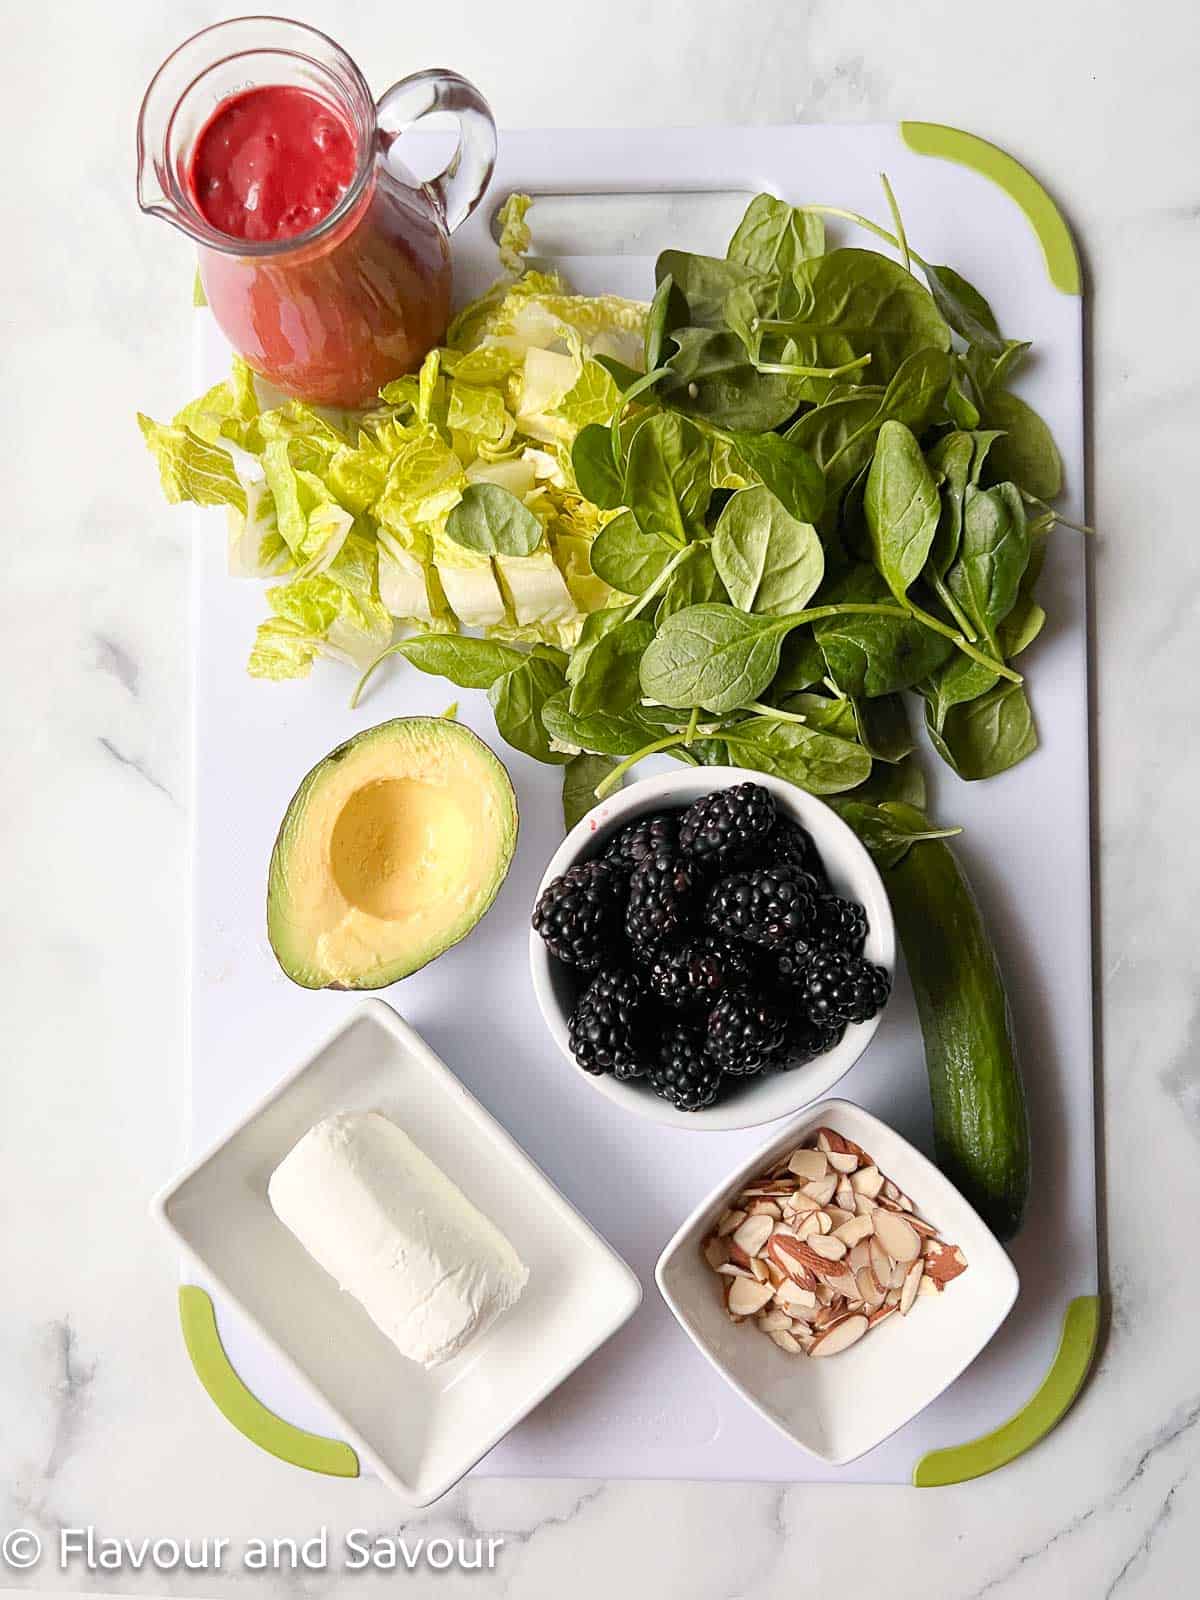 Ingredients for blackberry spinach salad: blackberry dressing, romaine, spinach, avocado, blackberries, cucumber, goat cheese, and toasted flaked almonds.